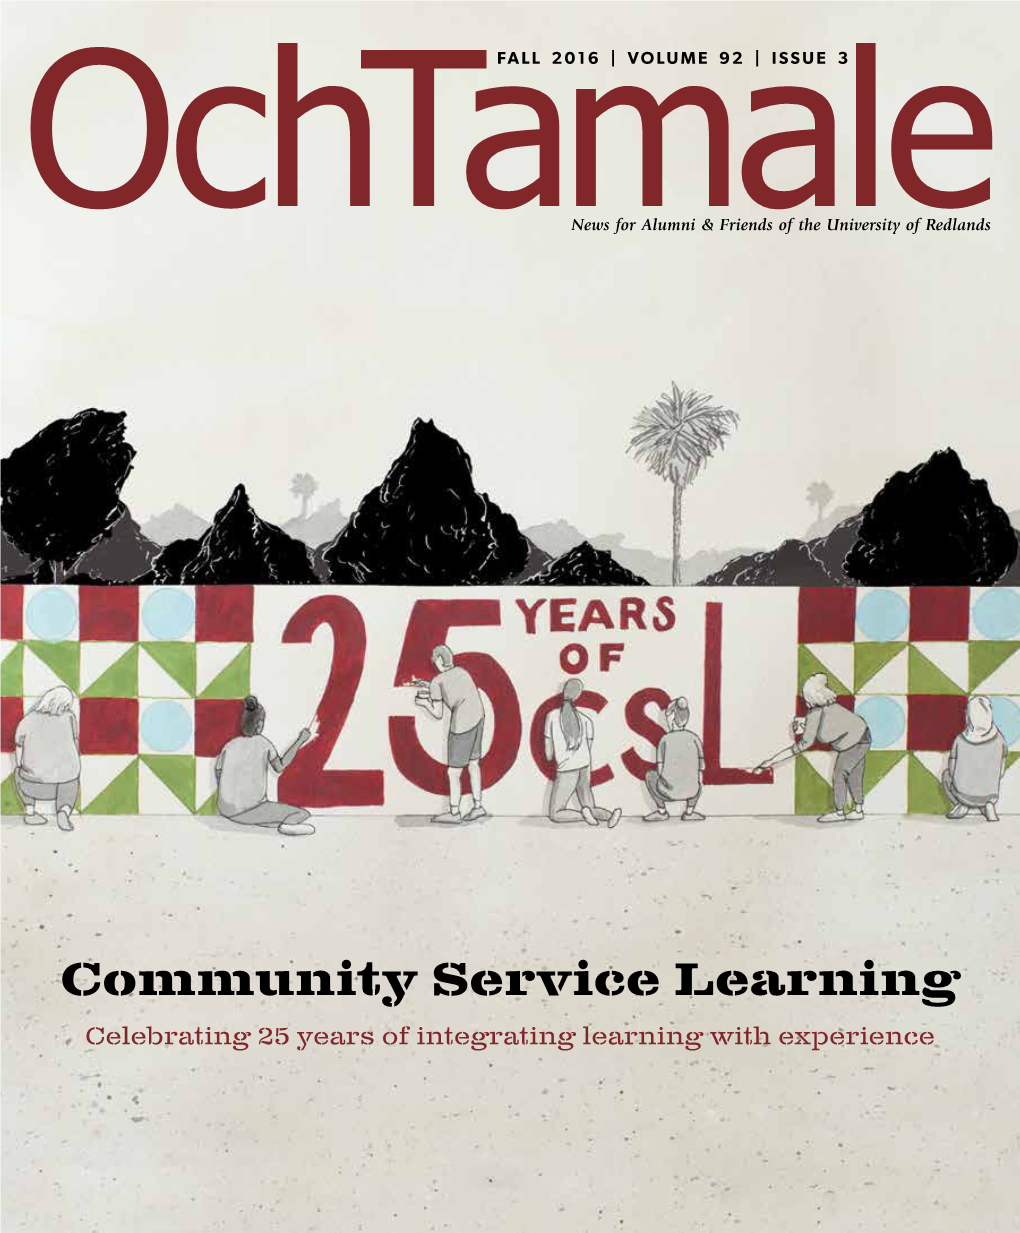 Community Service Learning Celebrating 25 Years of Integrating Learning with Experience OCH TAMALE MAGAZINE VOL